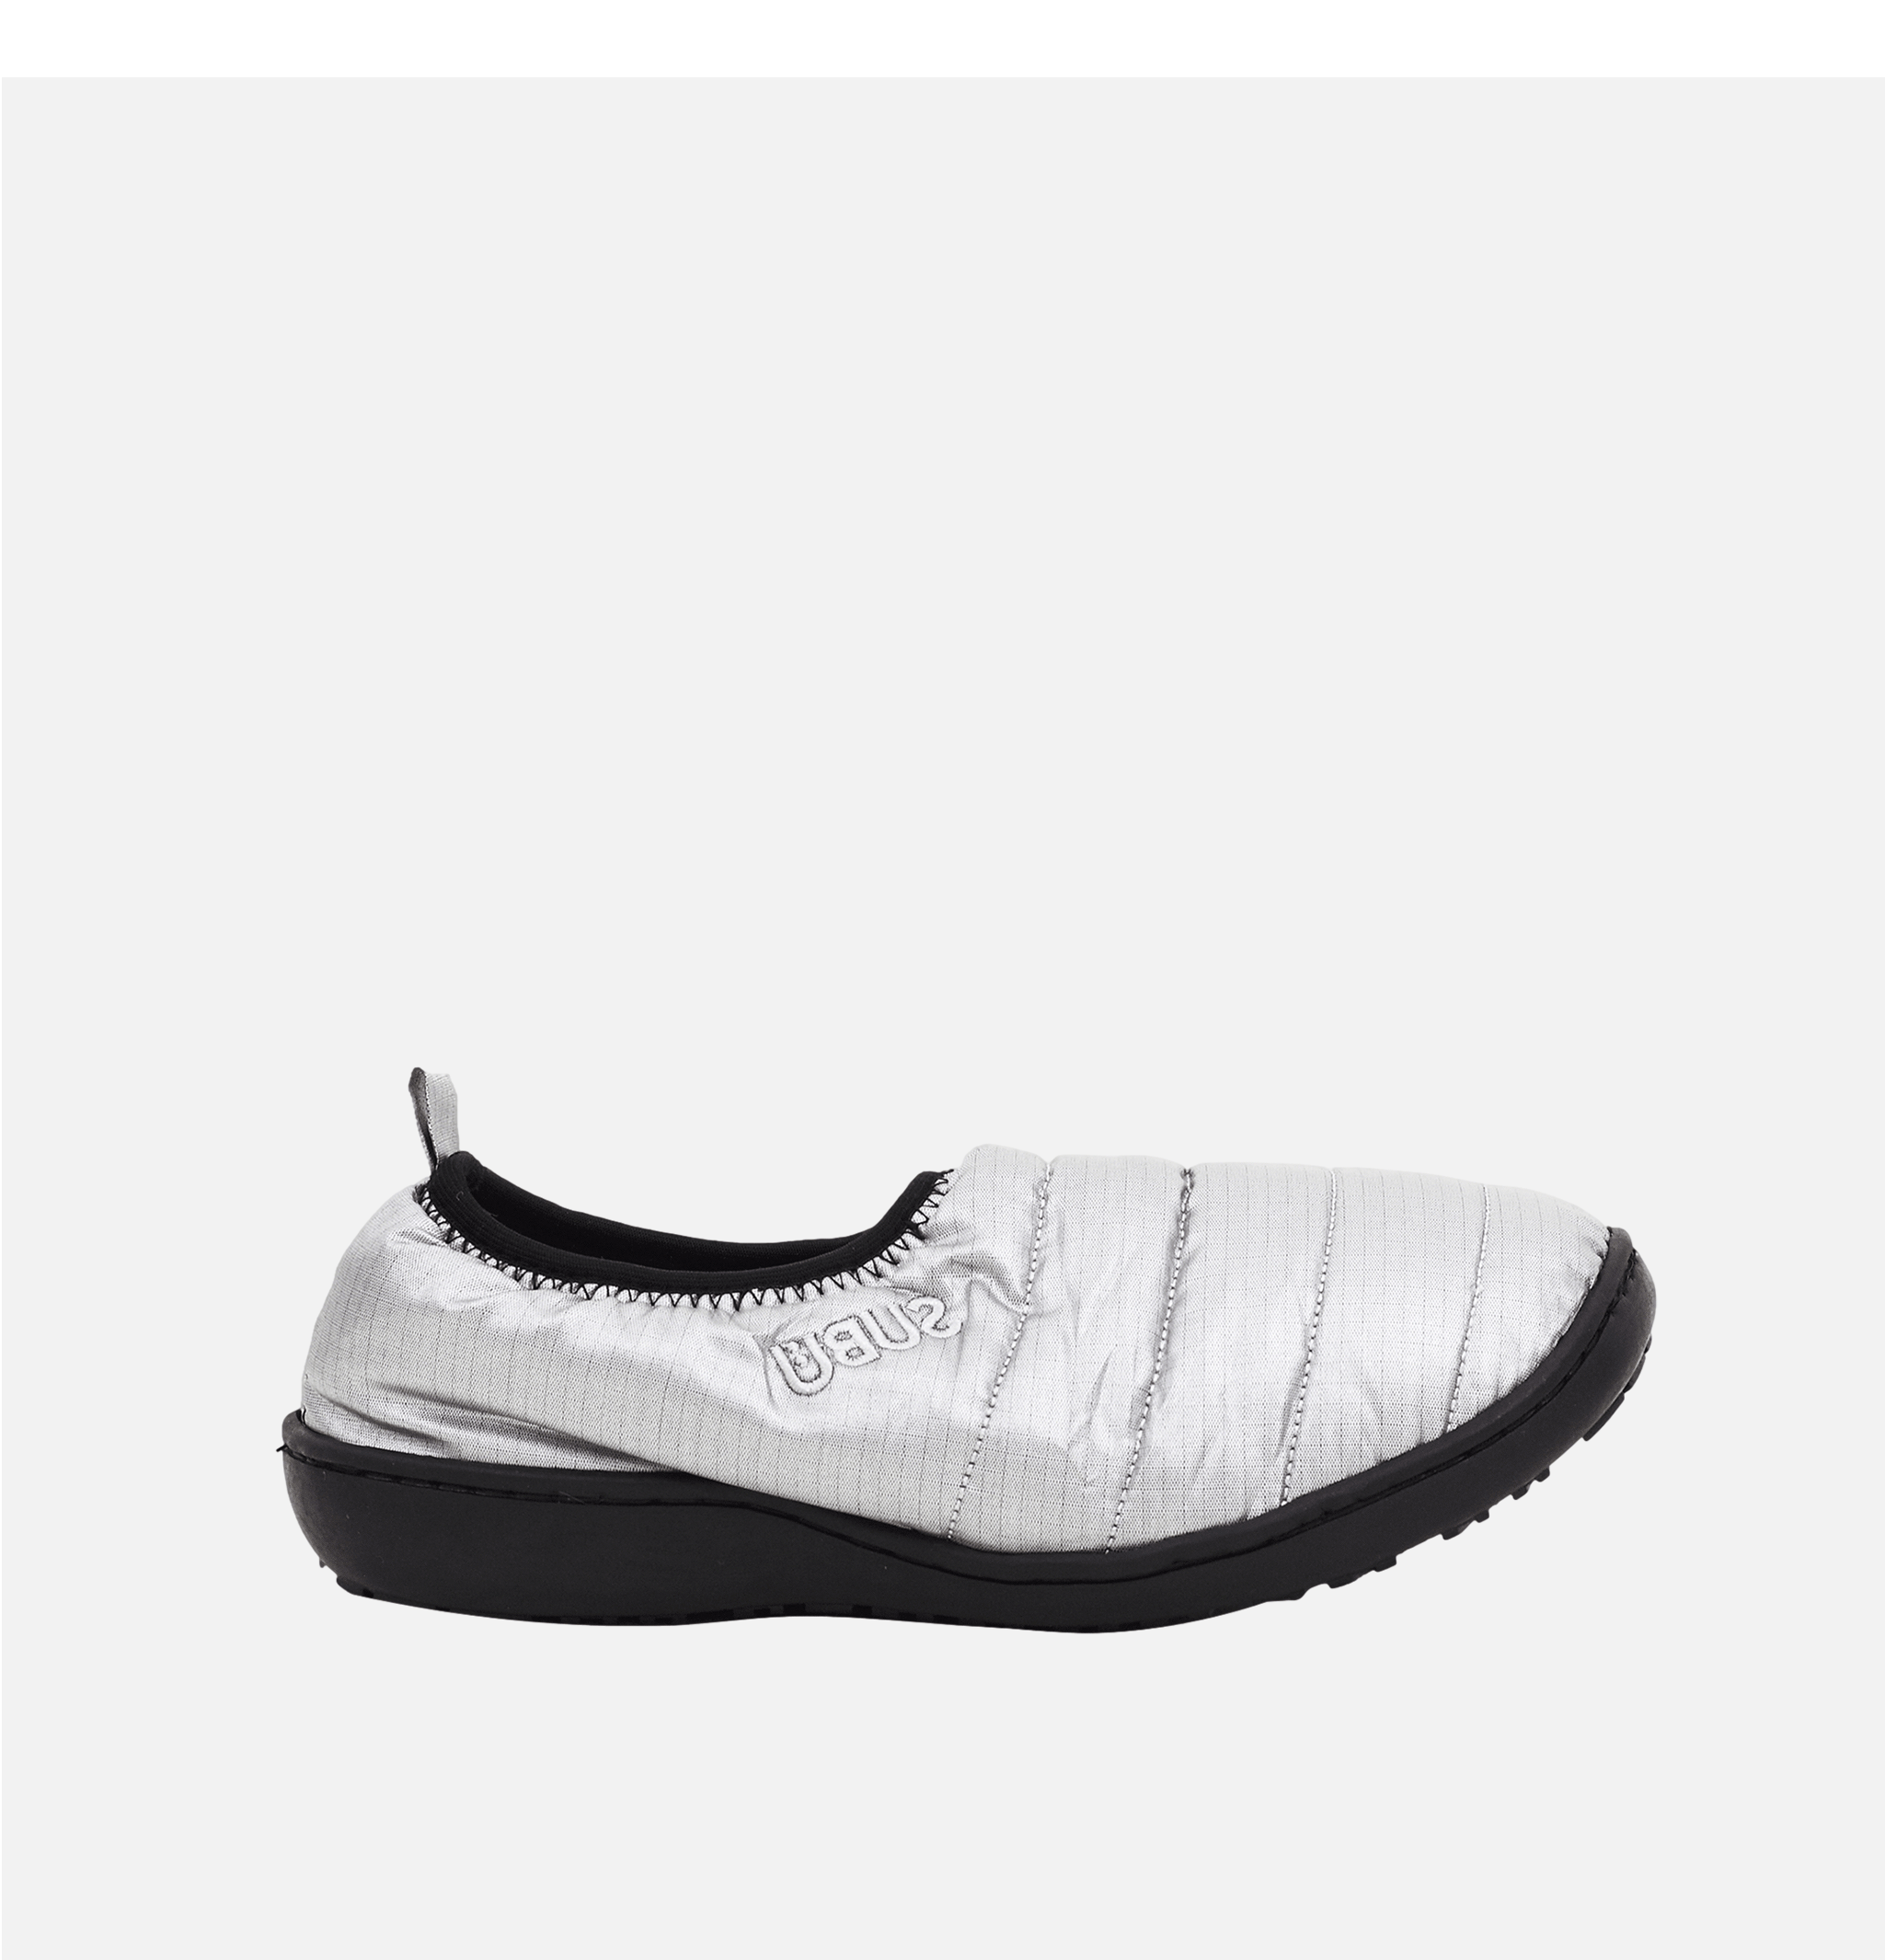 Subu Tokyo Packable Slippers Silver.